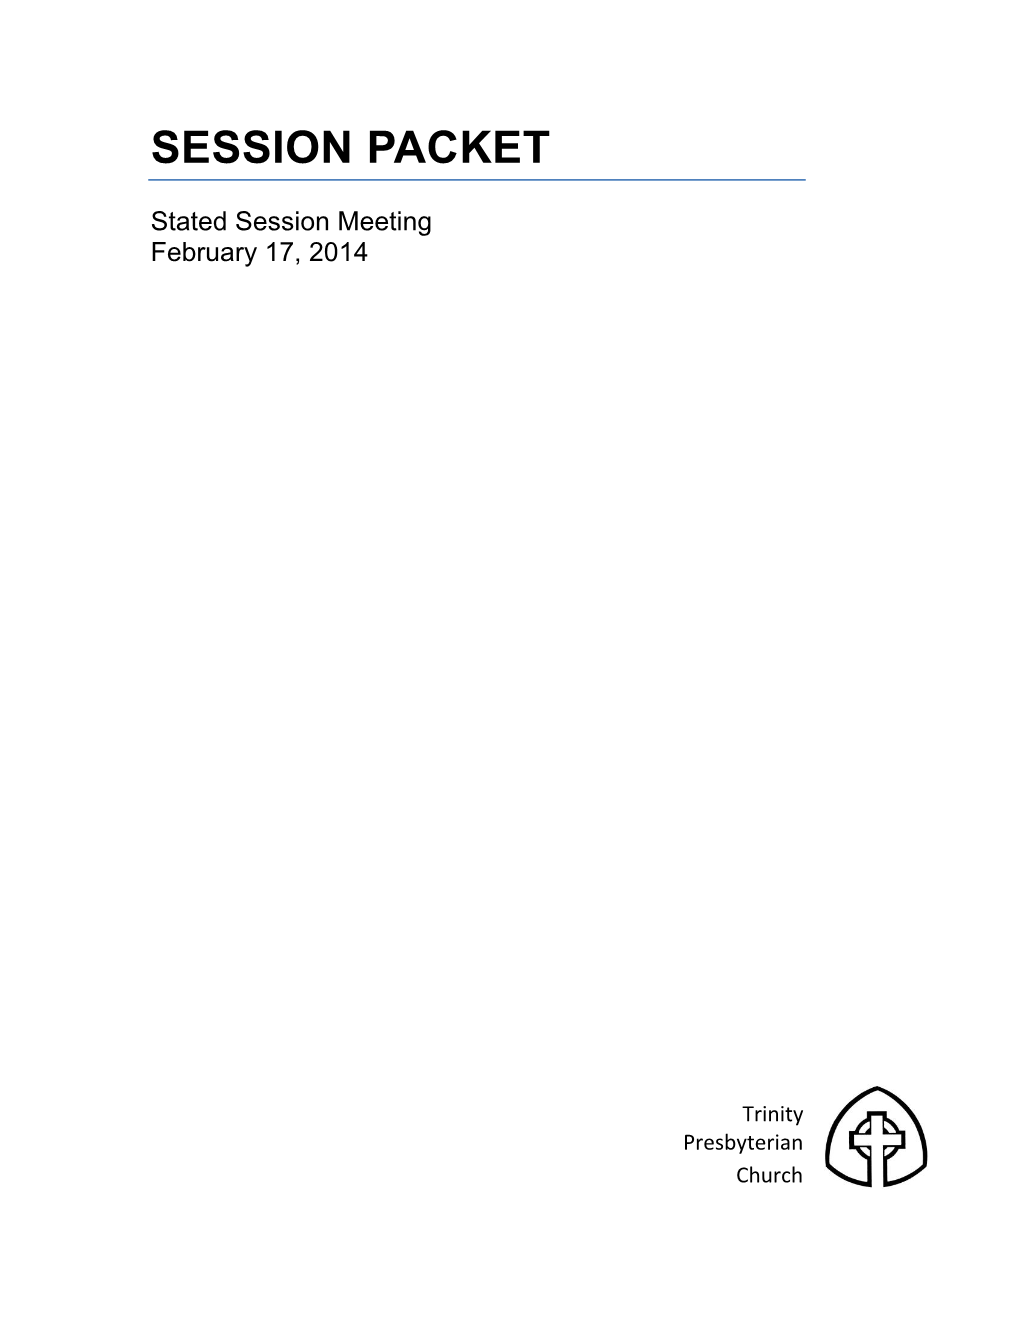 Session Packet